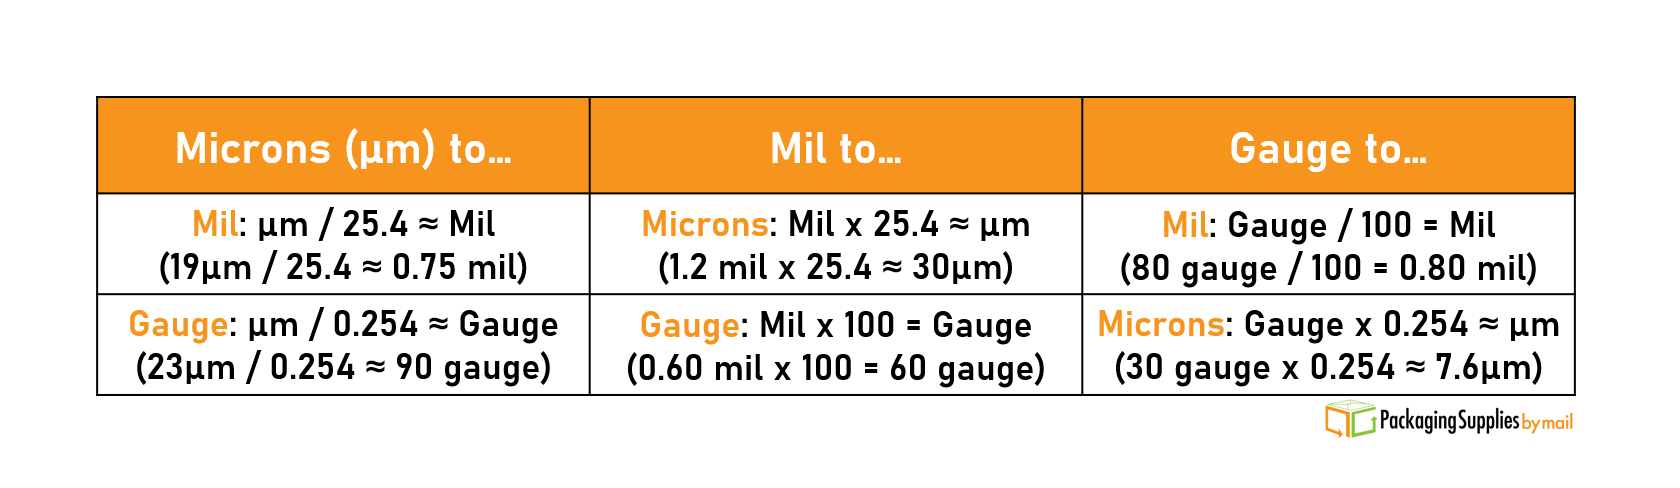 A conversion table for micron, mil, and gauge.